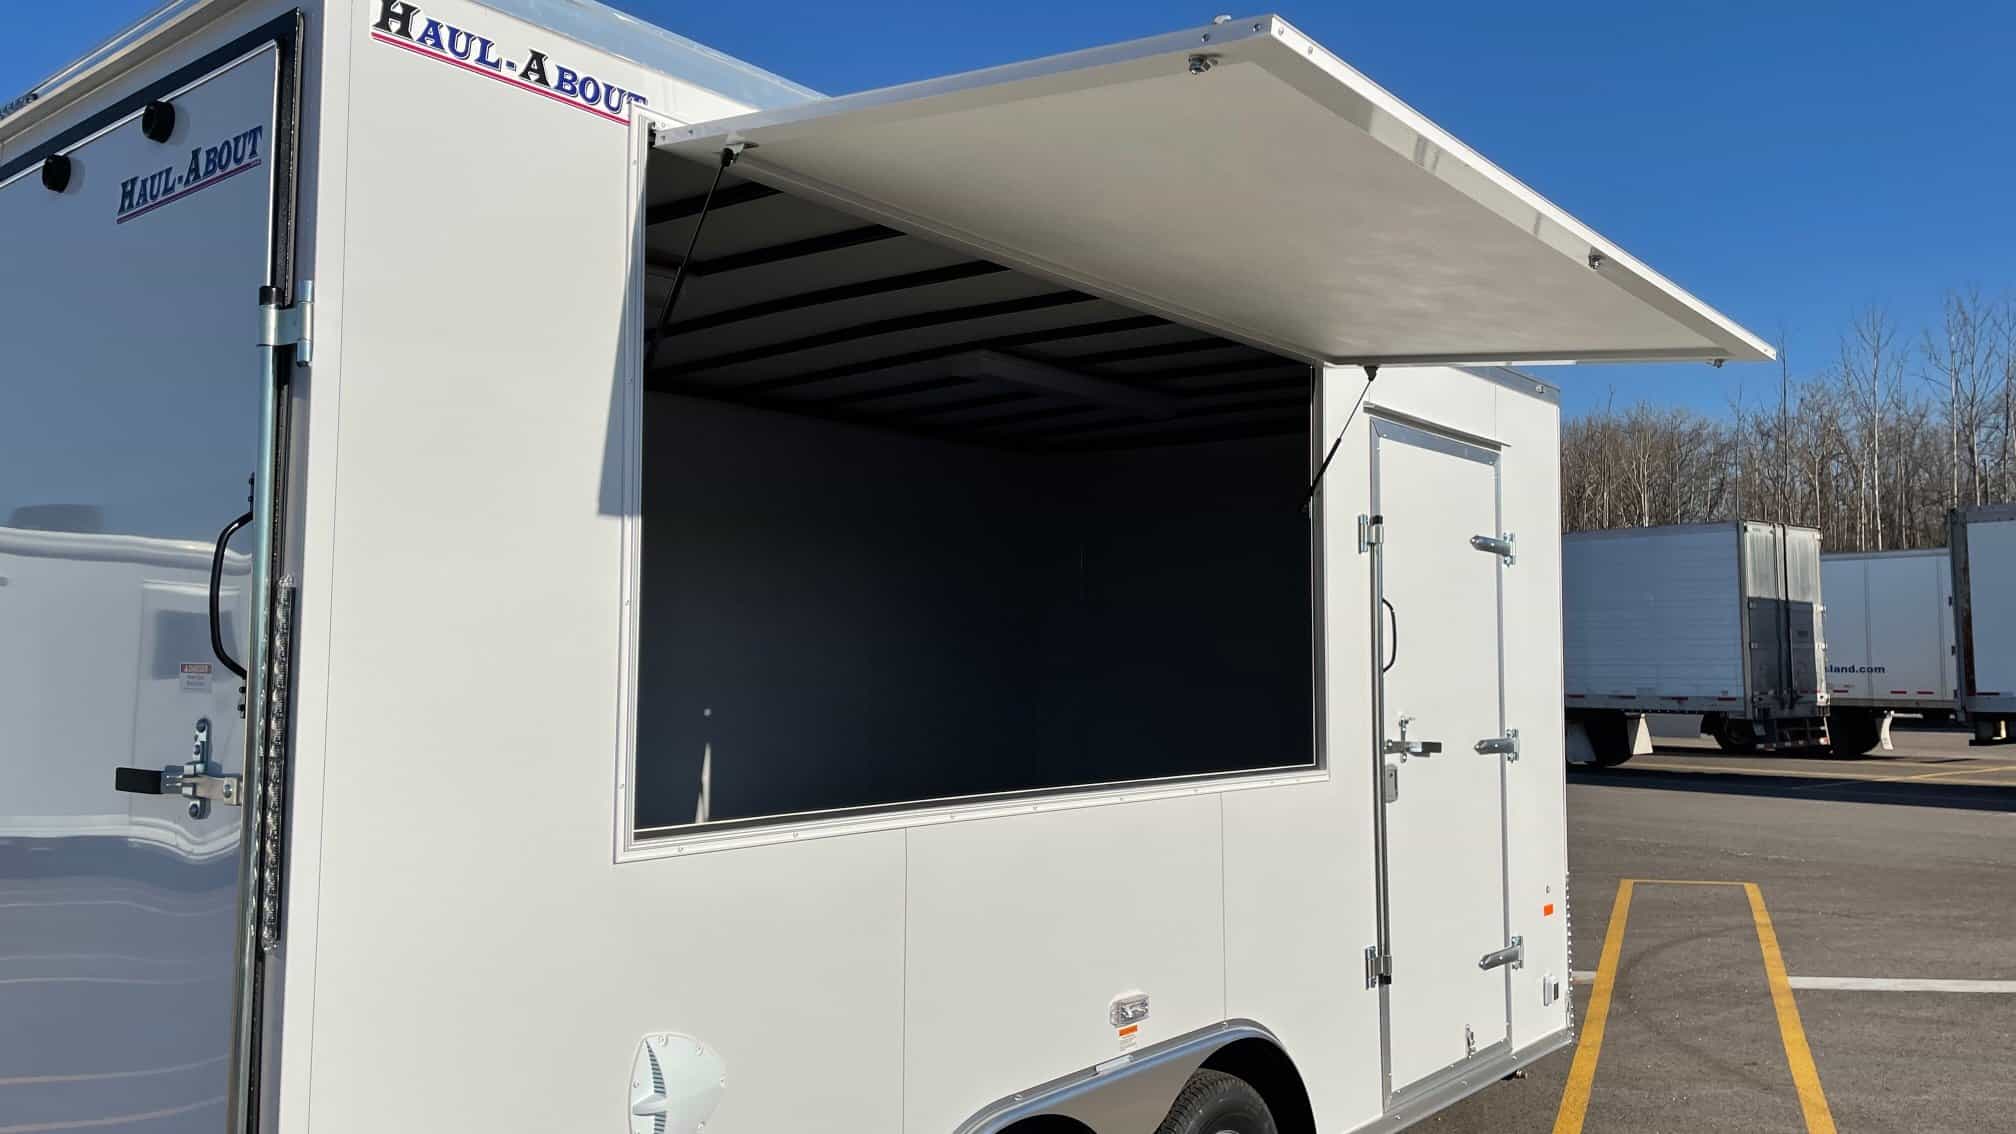 Retail, Event, Display & Marketing Trailers for Sale: Buy Here.